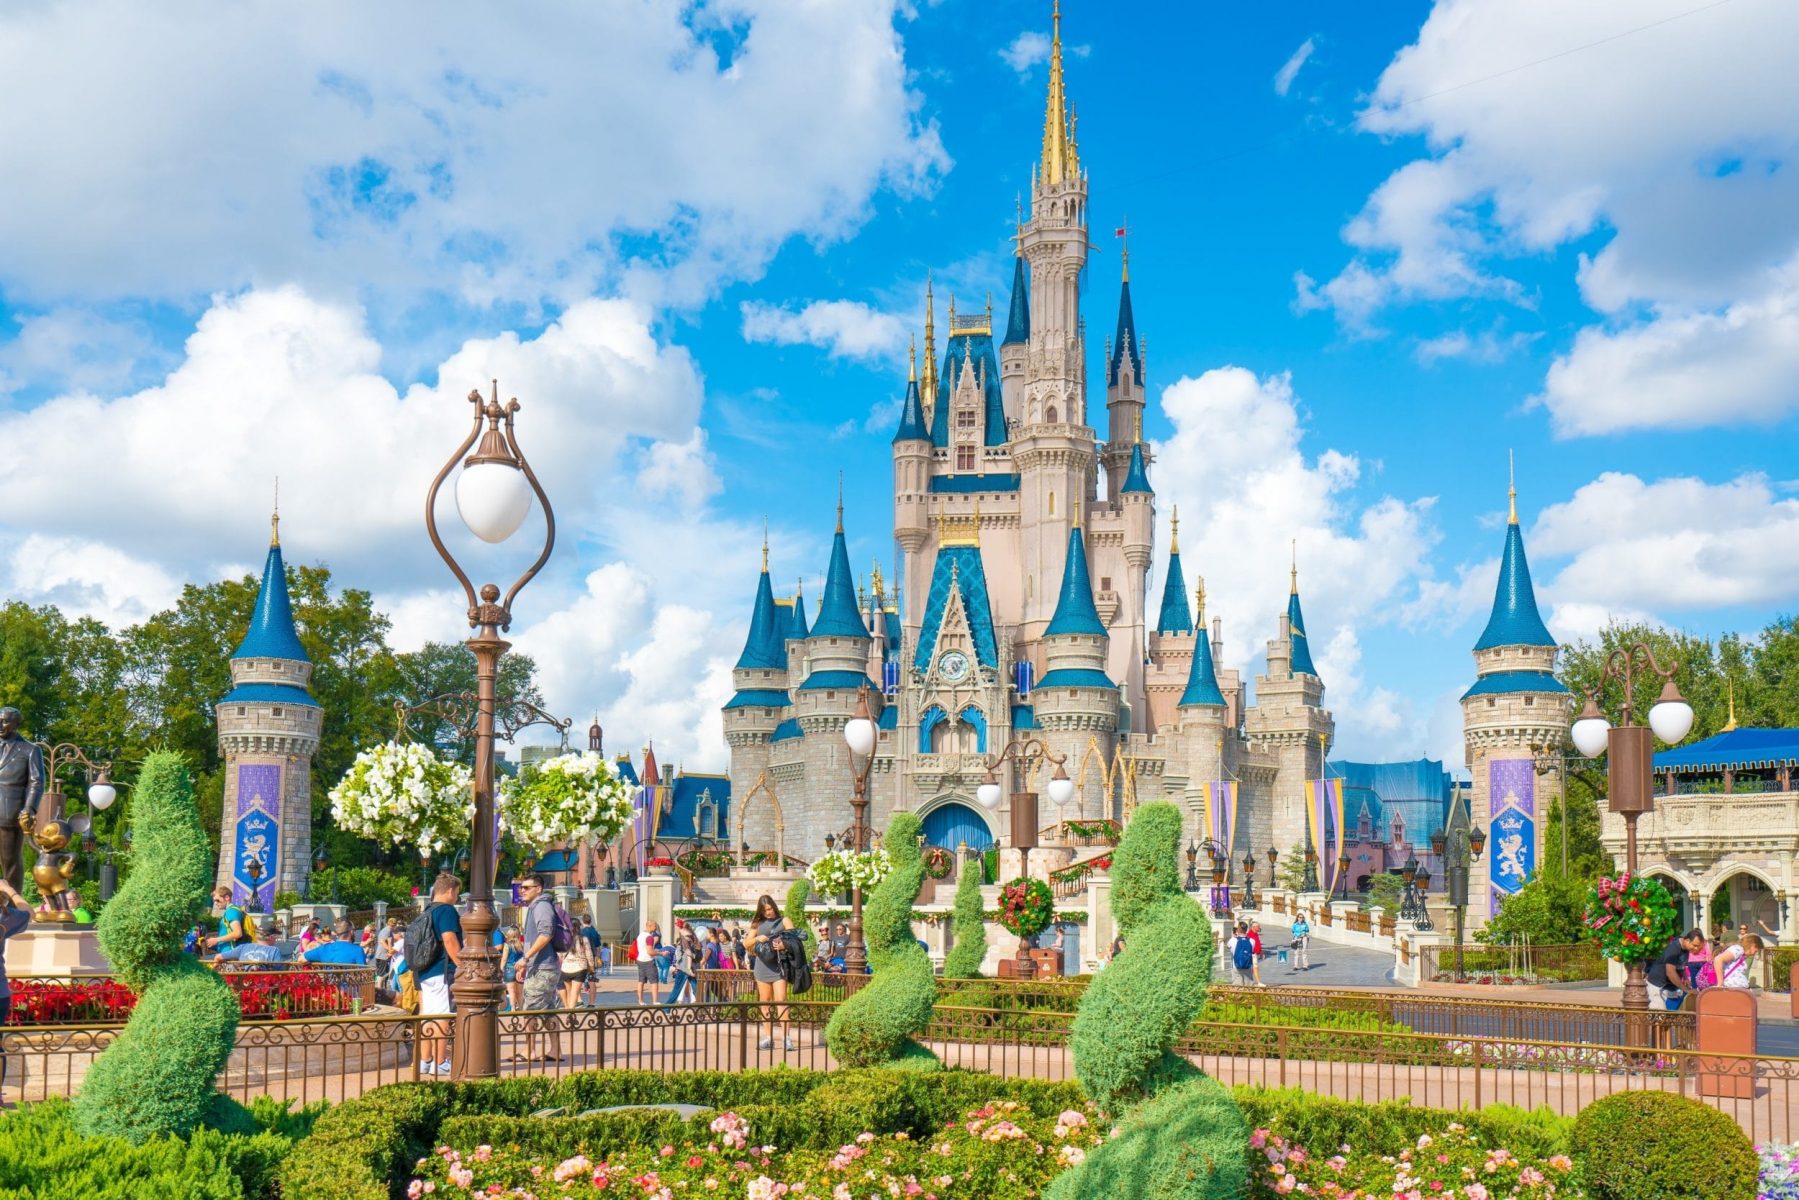 Late Risers Can Now Enjoy Discounted Entry To Disney World With Mid-Day Magic Ticket